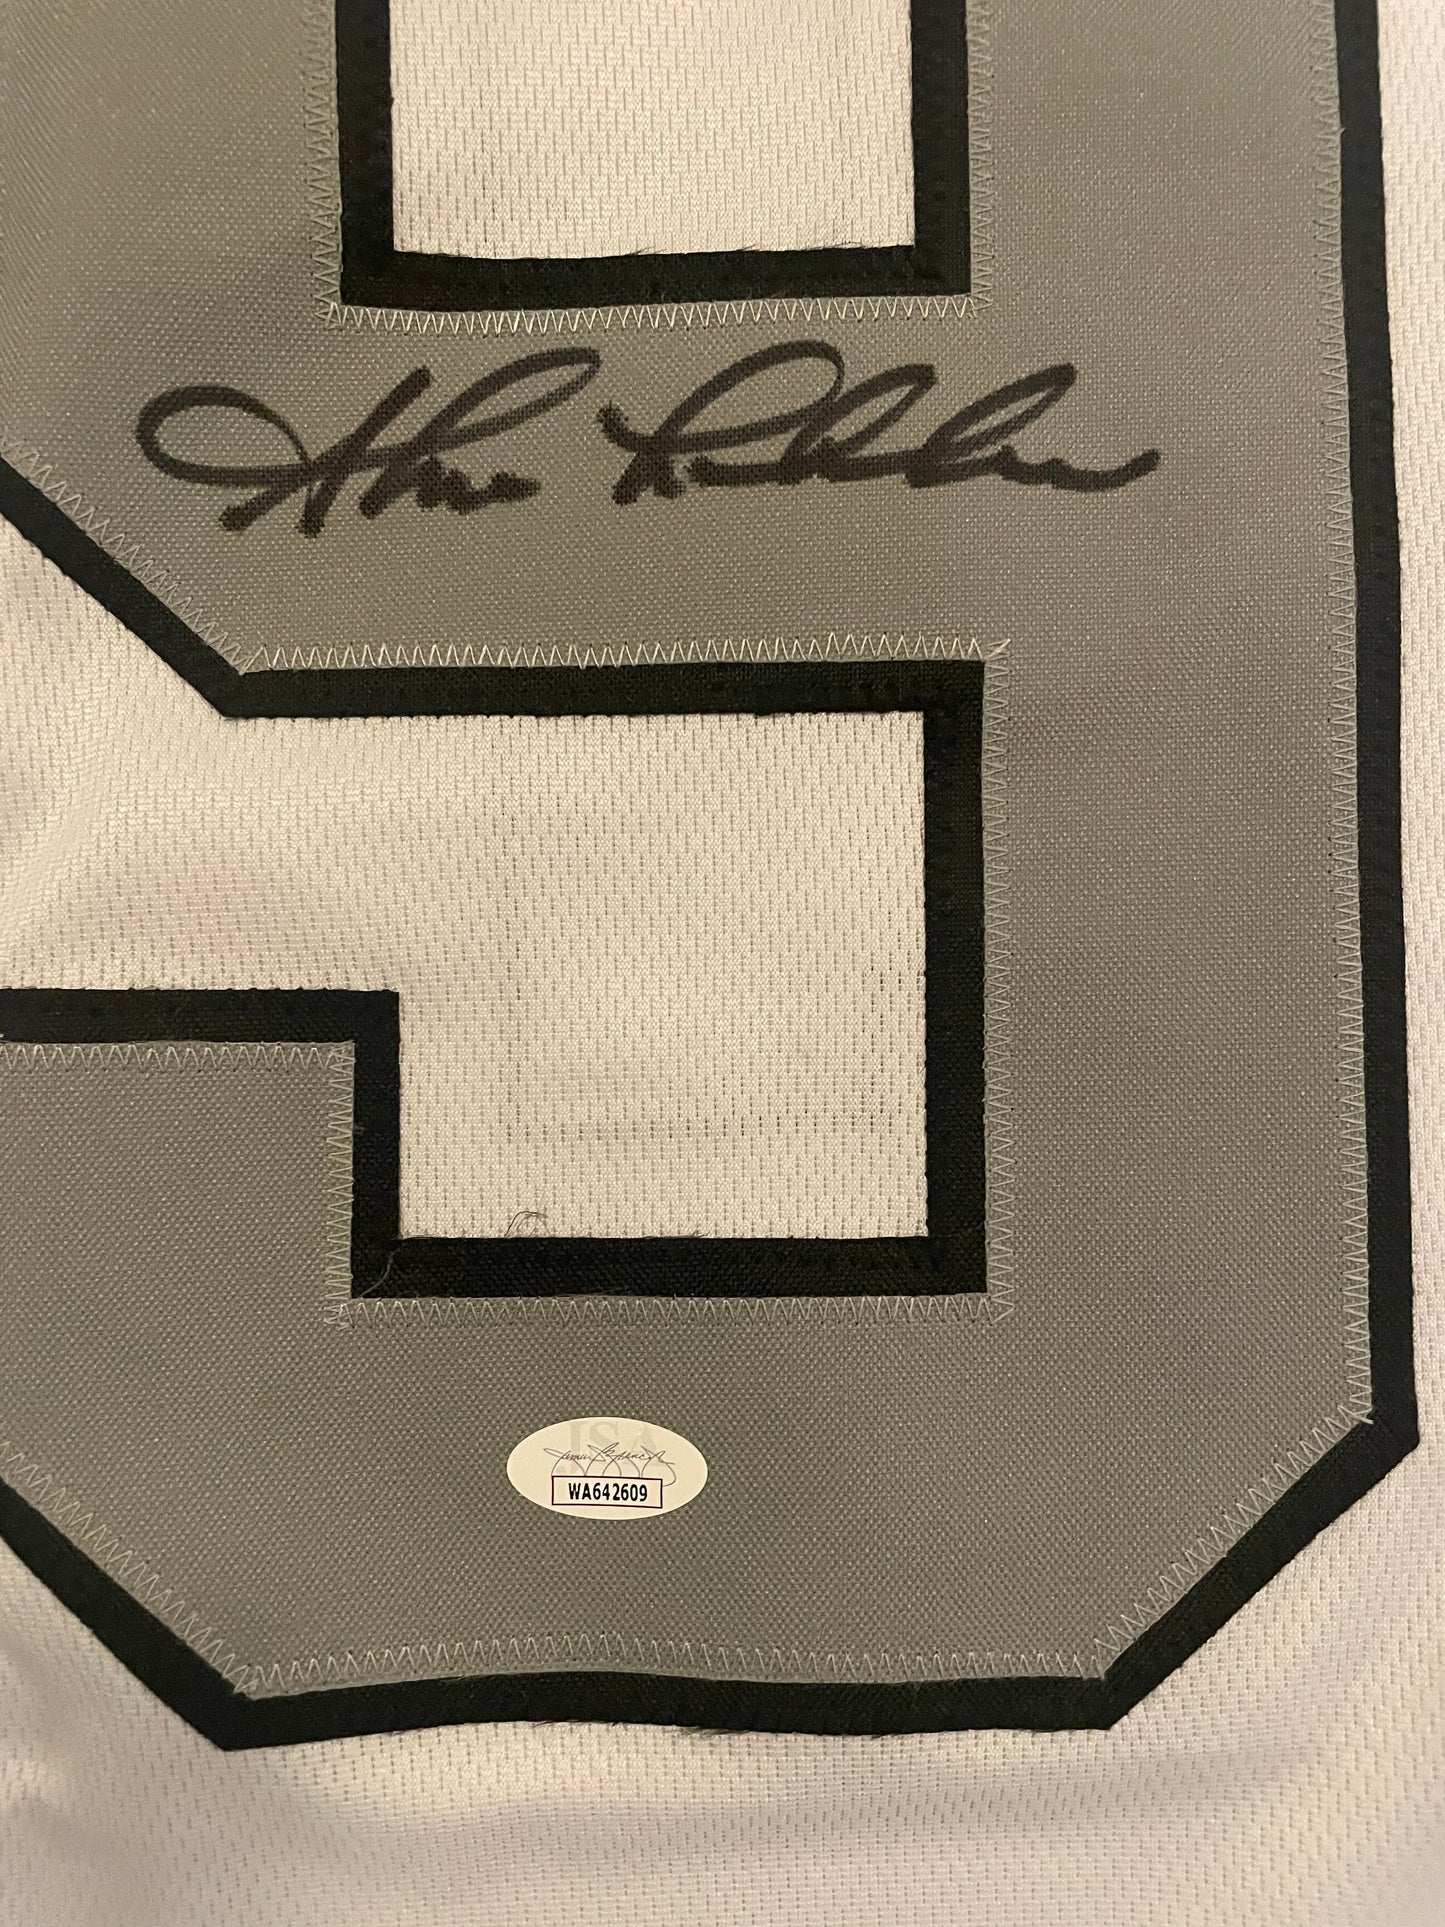 Shane Lechler Autographed & Authenticated Raiders Jersey w/COA